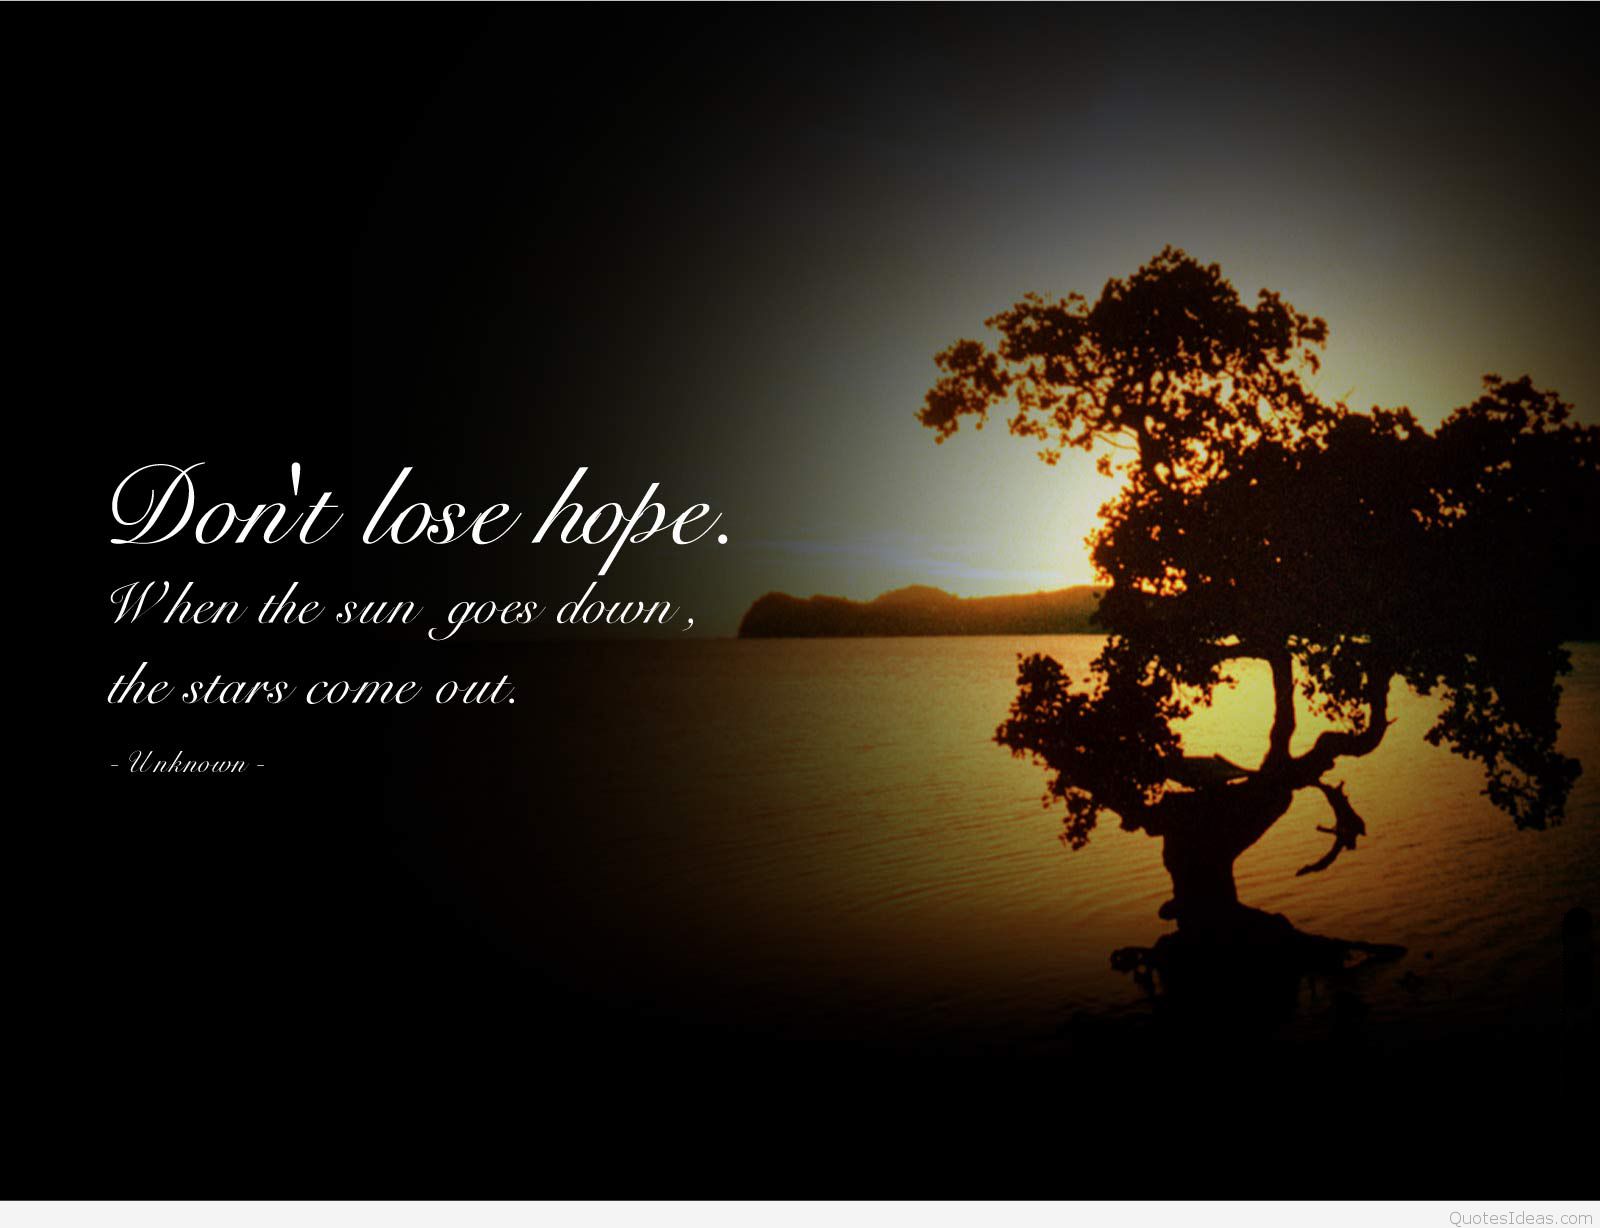 Desktop wallpapers with quotes